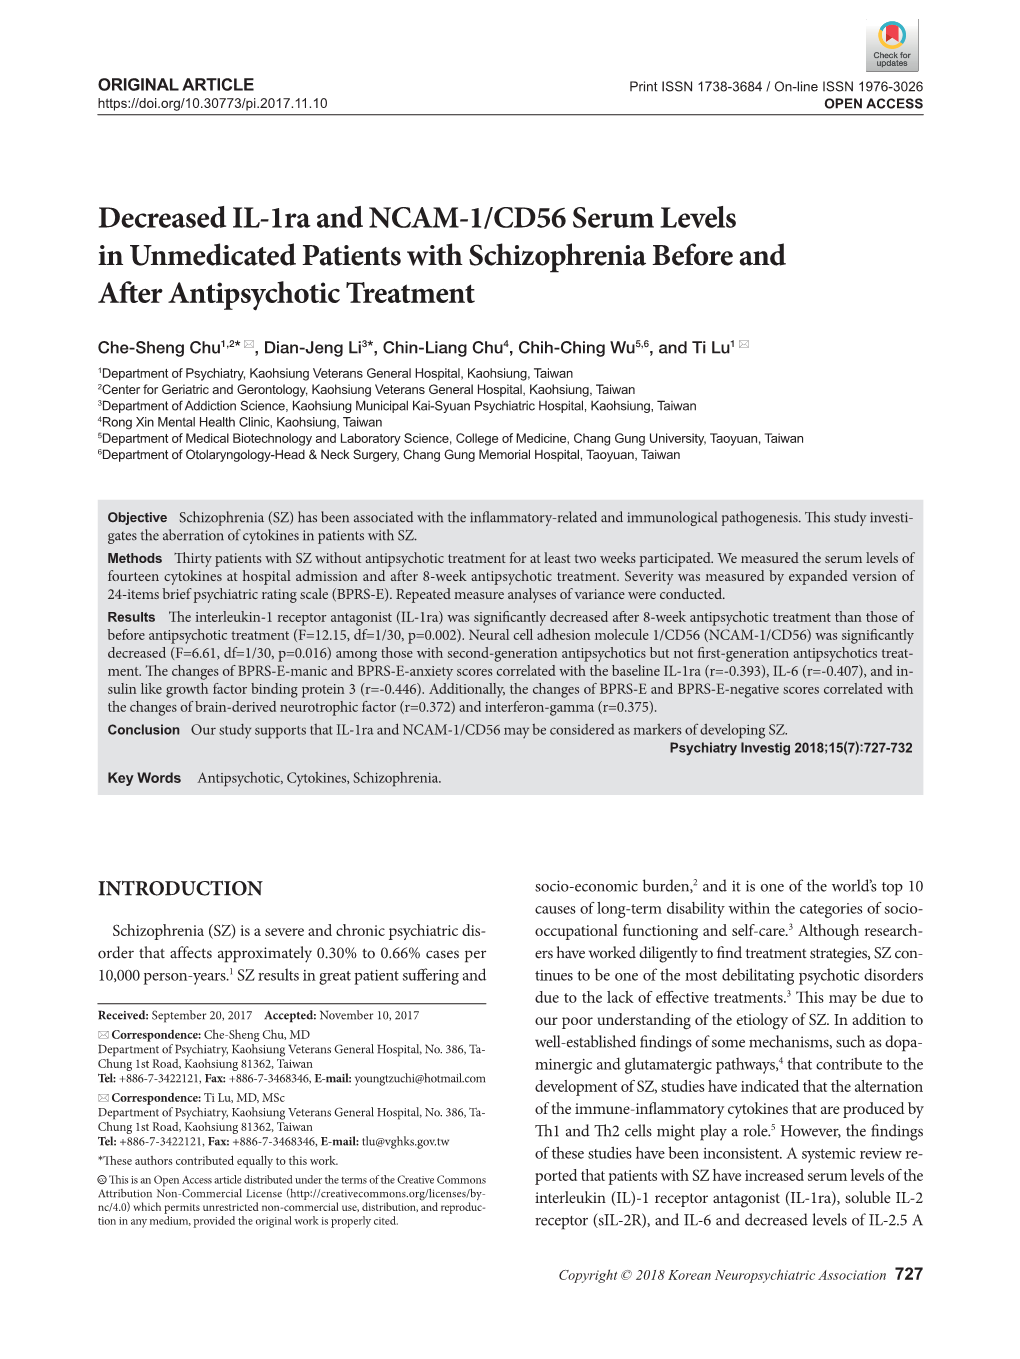 Decreased IL-1Ra and NCAM-1/CD56 Serum Levels in Unmedicated Patients with Schizophrenia Before and After Antipsychotic Treatment